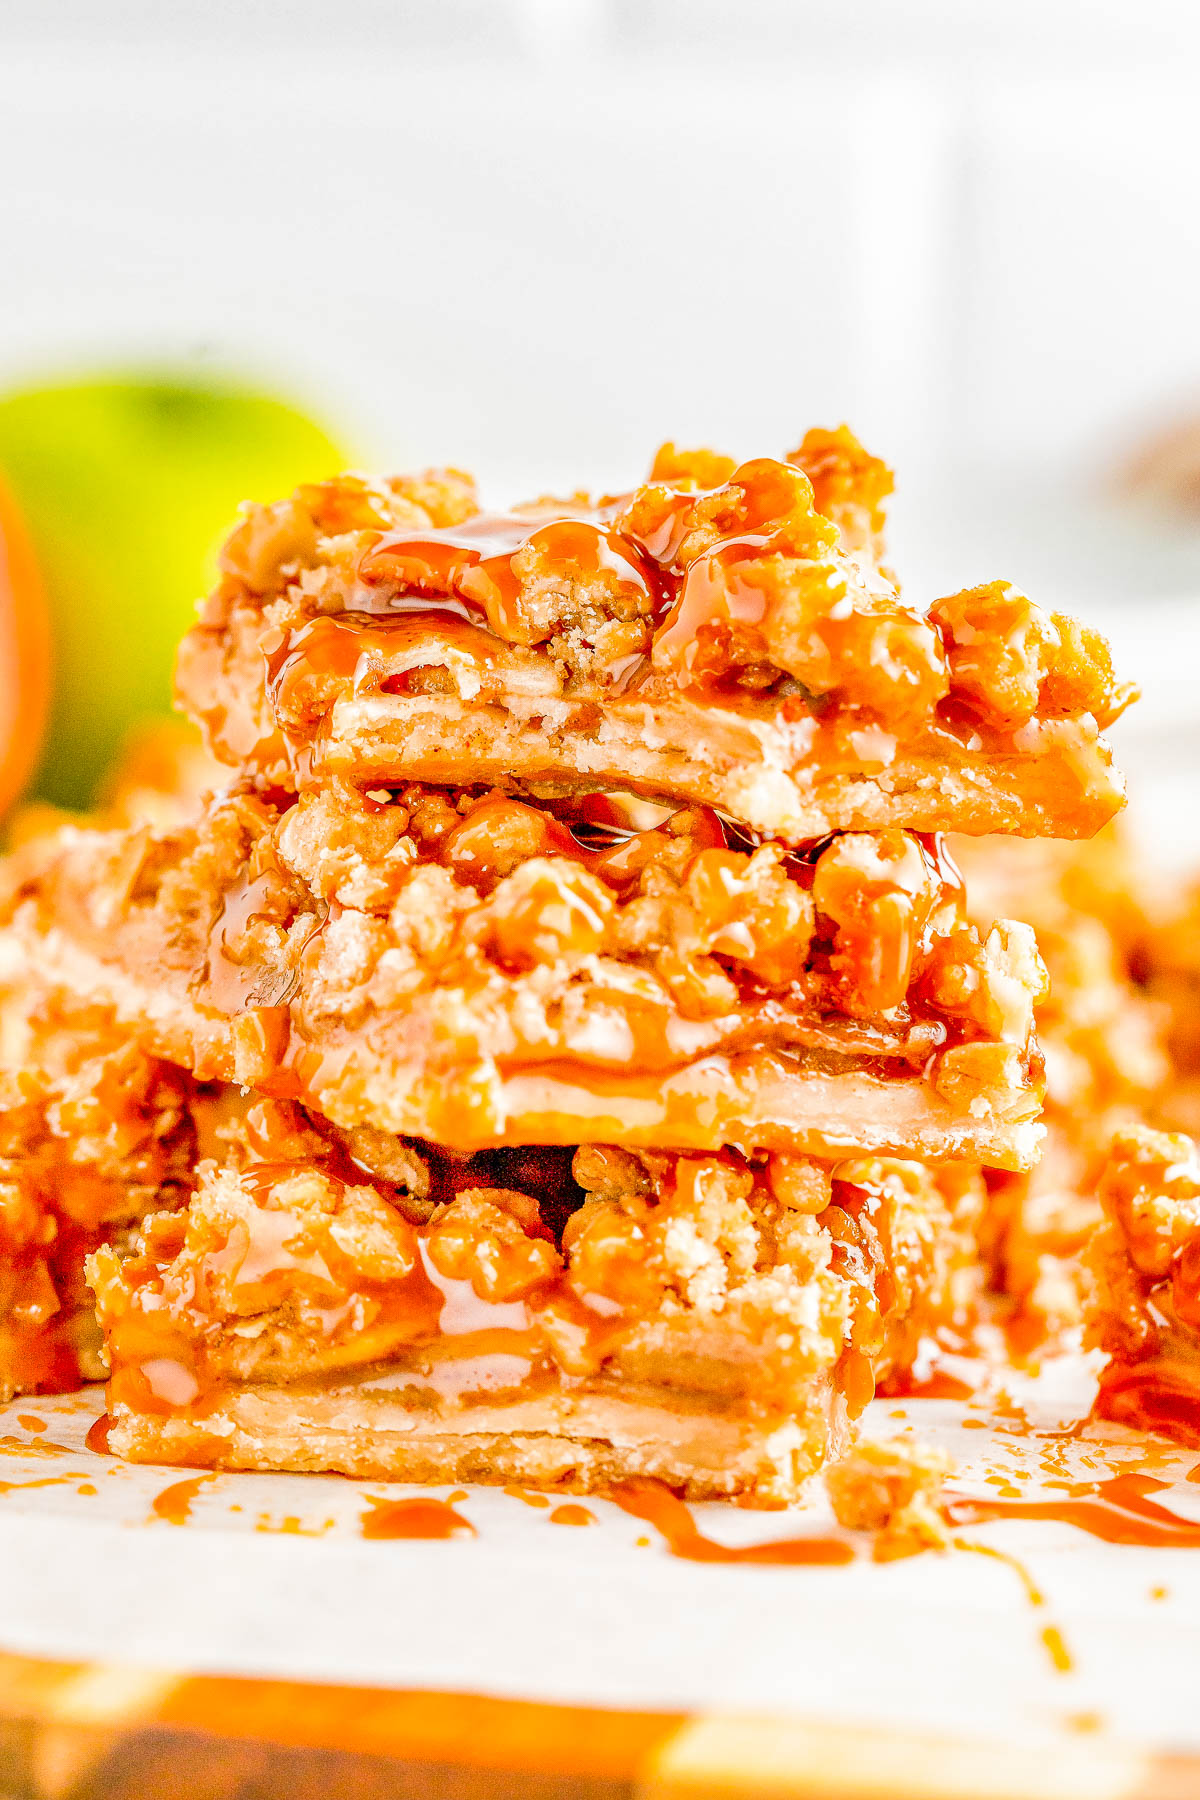 Apple Pie Bars — A flaky, buttery crust is topped with homemade apple pie filling and an oat crumble topping in these INCREDIBLE spiced apple pie bars! Salted caramel sauce is the finishing touch because nothing beats the combination of caramel and apples! Make these EASY, no-mixer bars as written for a smaller gathering, or double it for a party! 